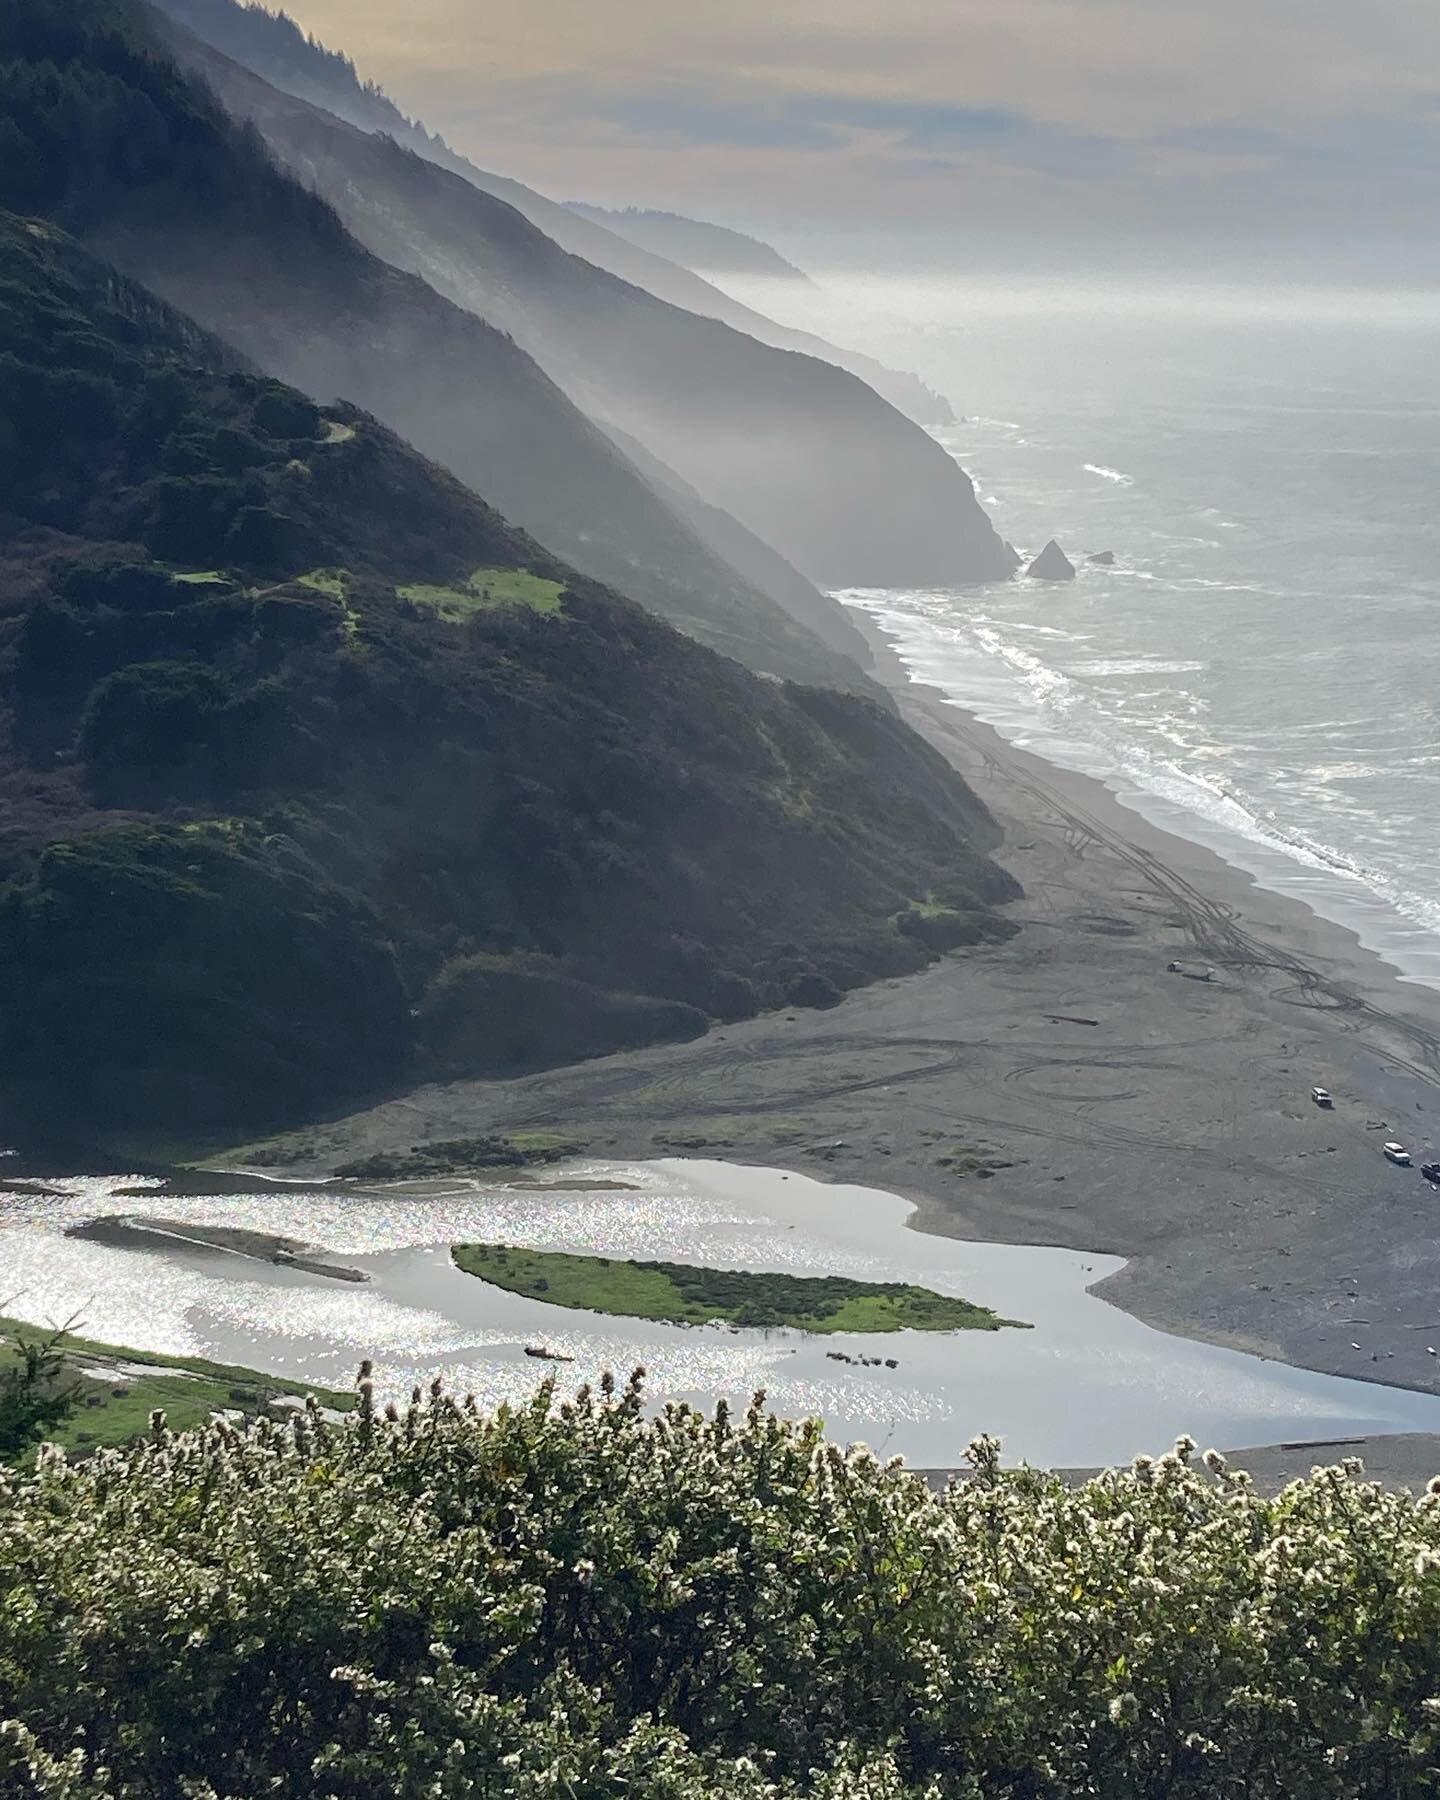 Are you ready to plan a getaway in July? Our 7-day Wilderness Embodiment Retreat at Lost Coast is July 10-16, and we couldn't be more excited to go the distance with you. In our time together in community we'll create a sacred container to be seen, h